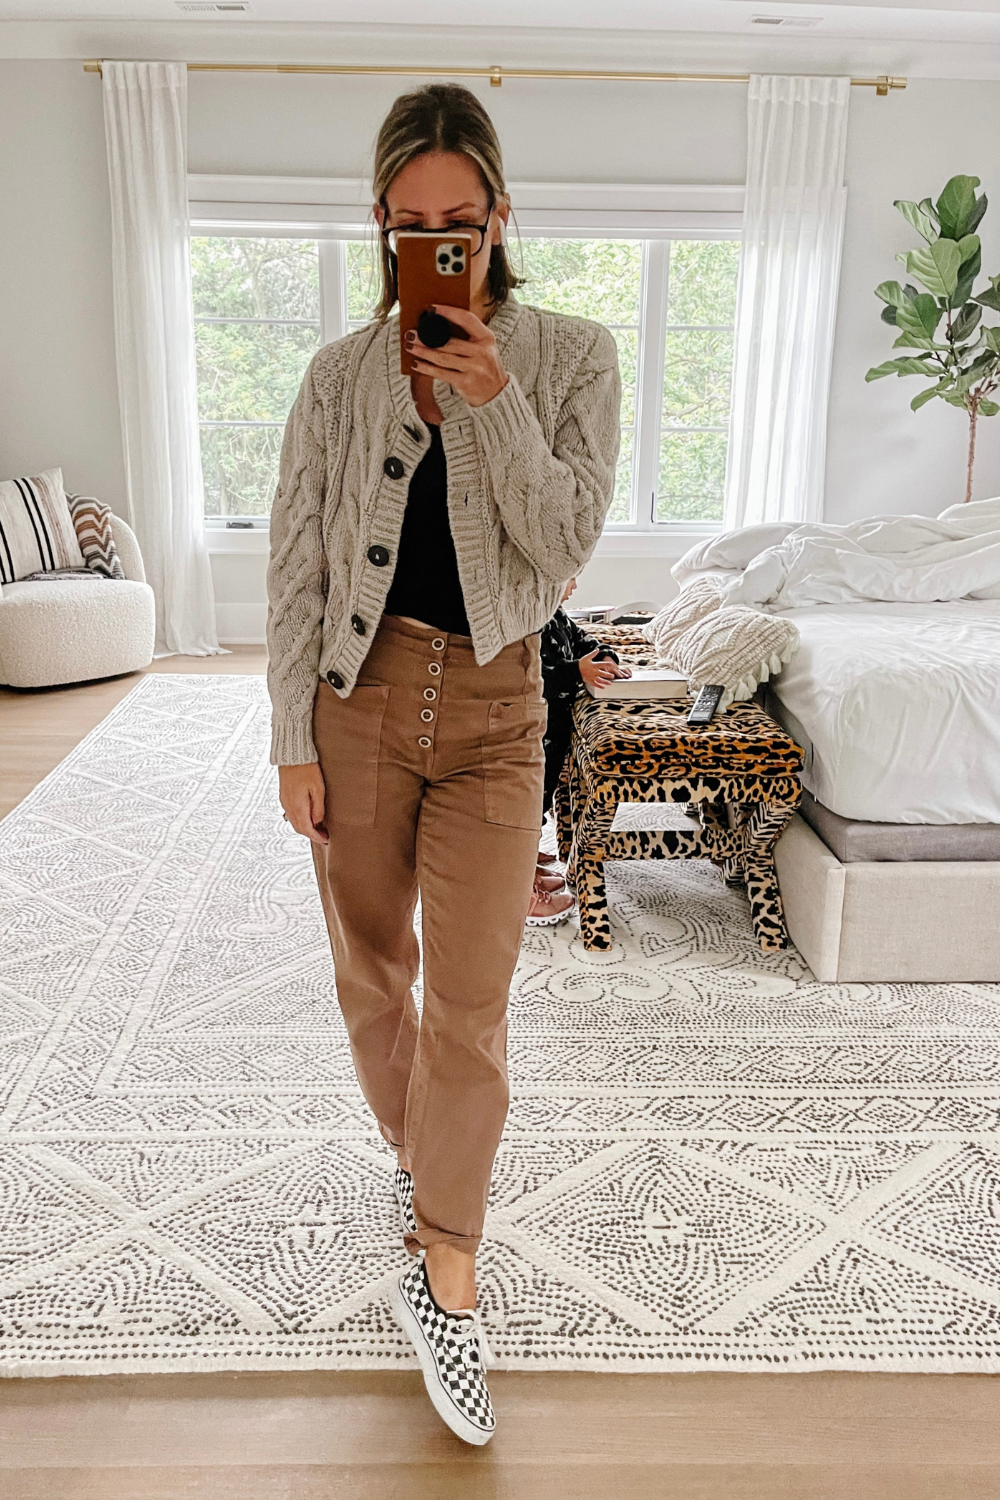 Suzanne wearing Pistola trousers, a cardigan, and checkered Vans